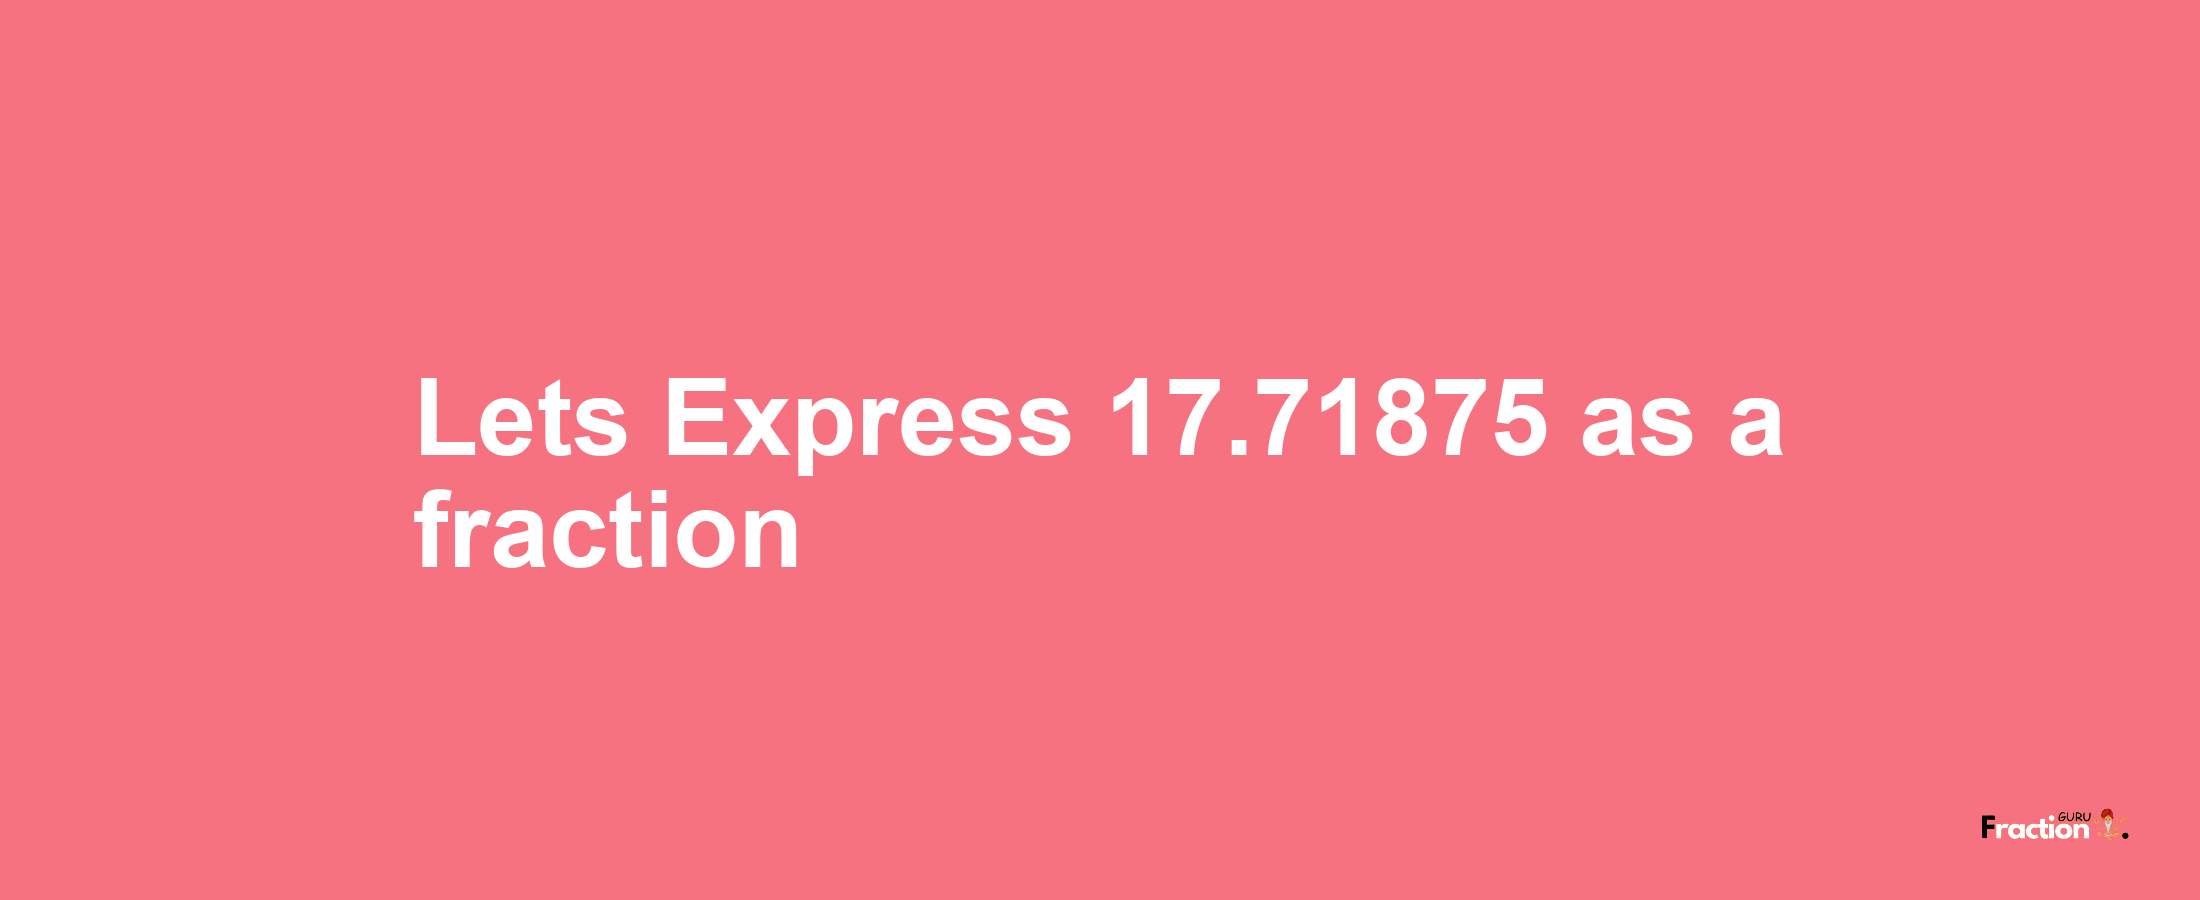 Lets Express 17.71875 as afraction